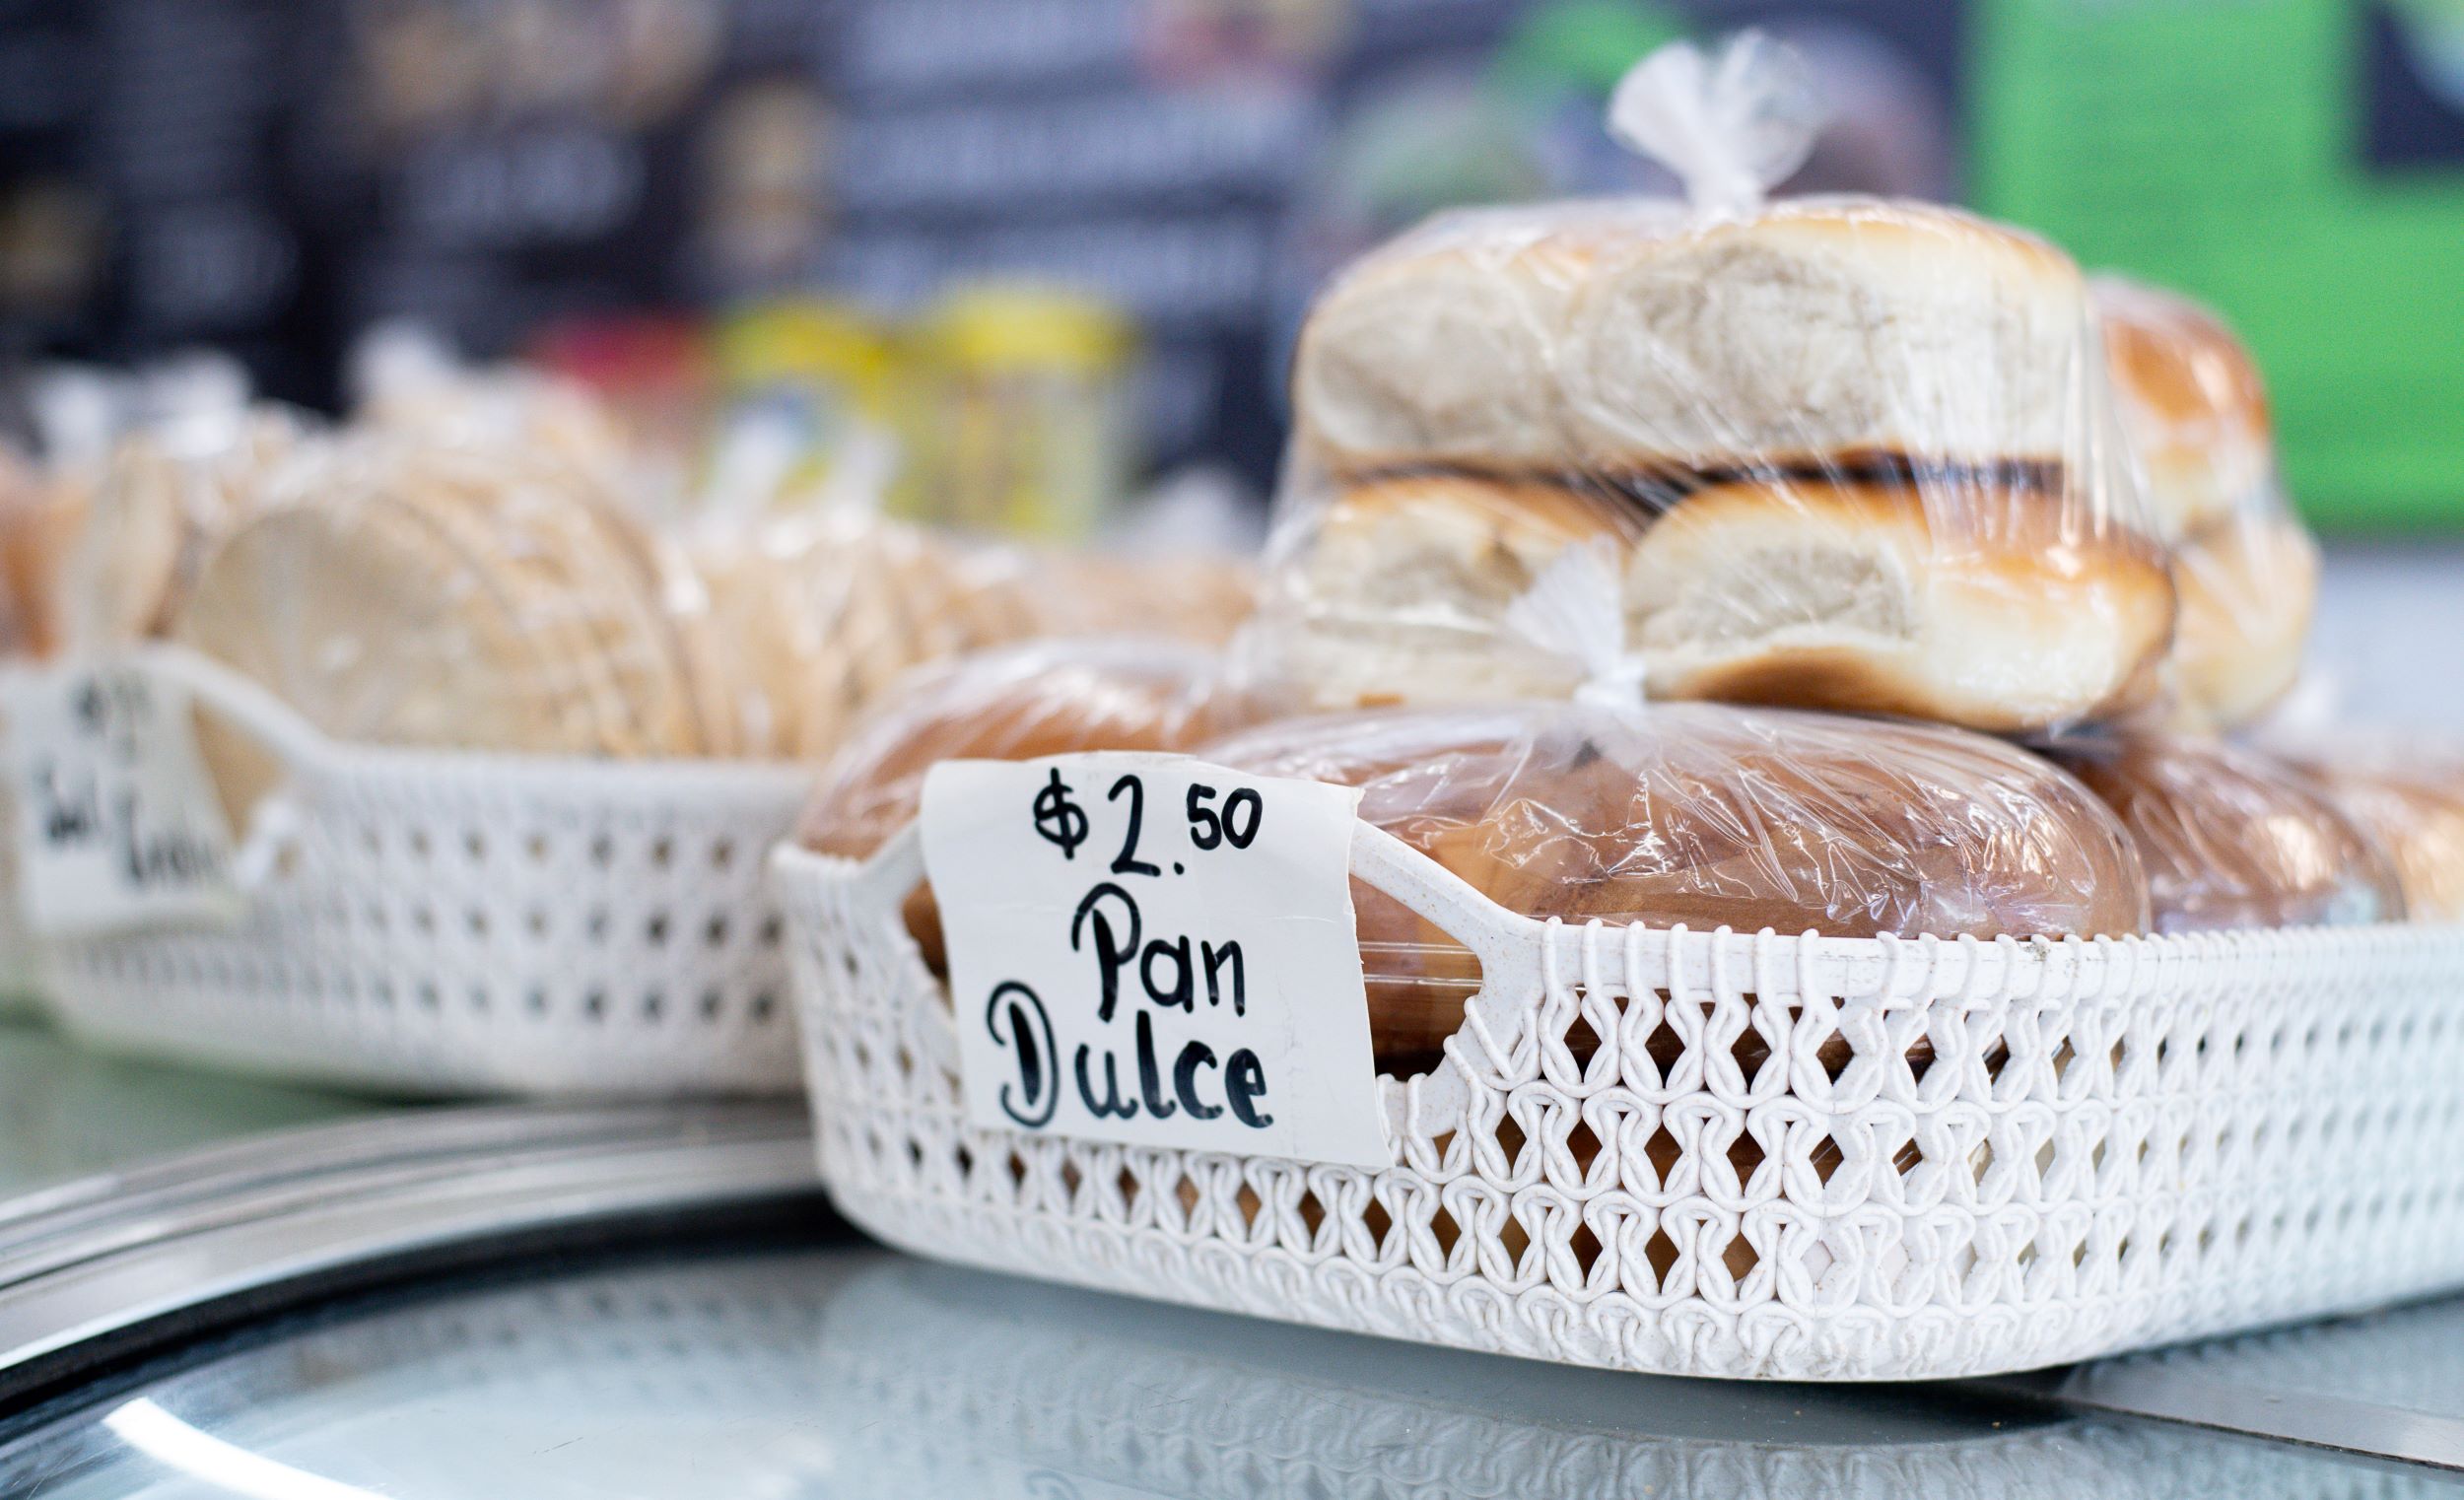 Woven baskets filled with bagged loaves of pan dulce (sweet bread), each priced at $2.50, displayed on a shiny counter in a bakery.